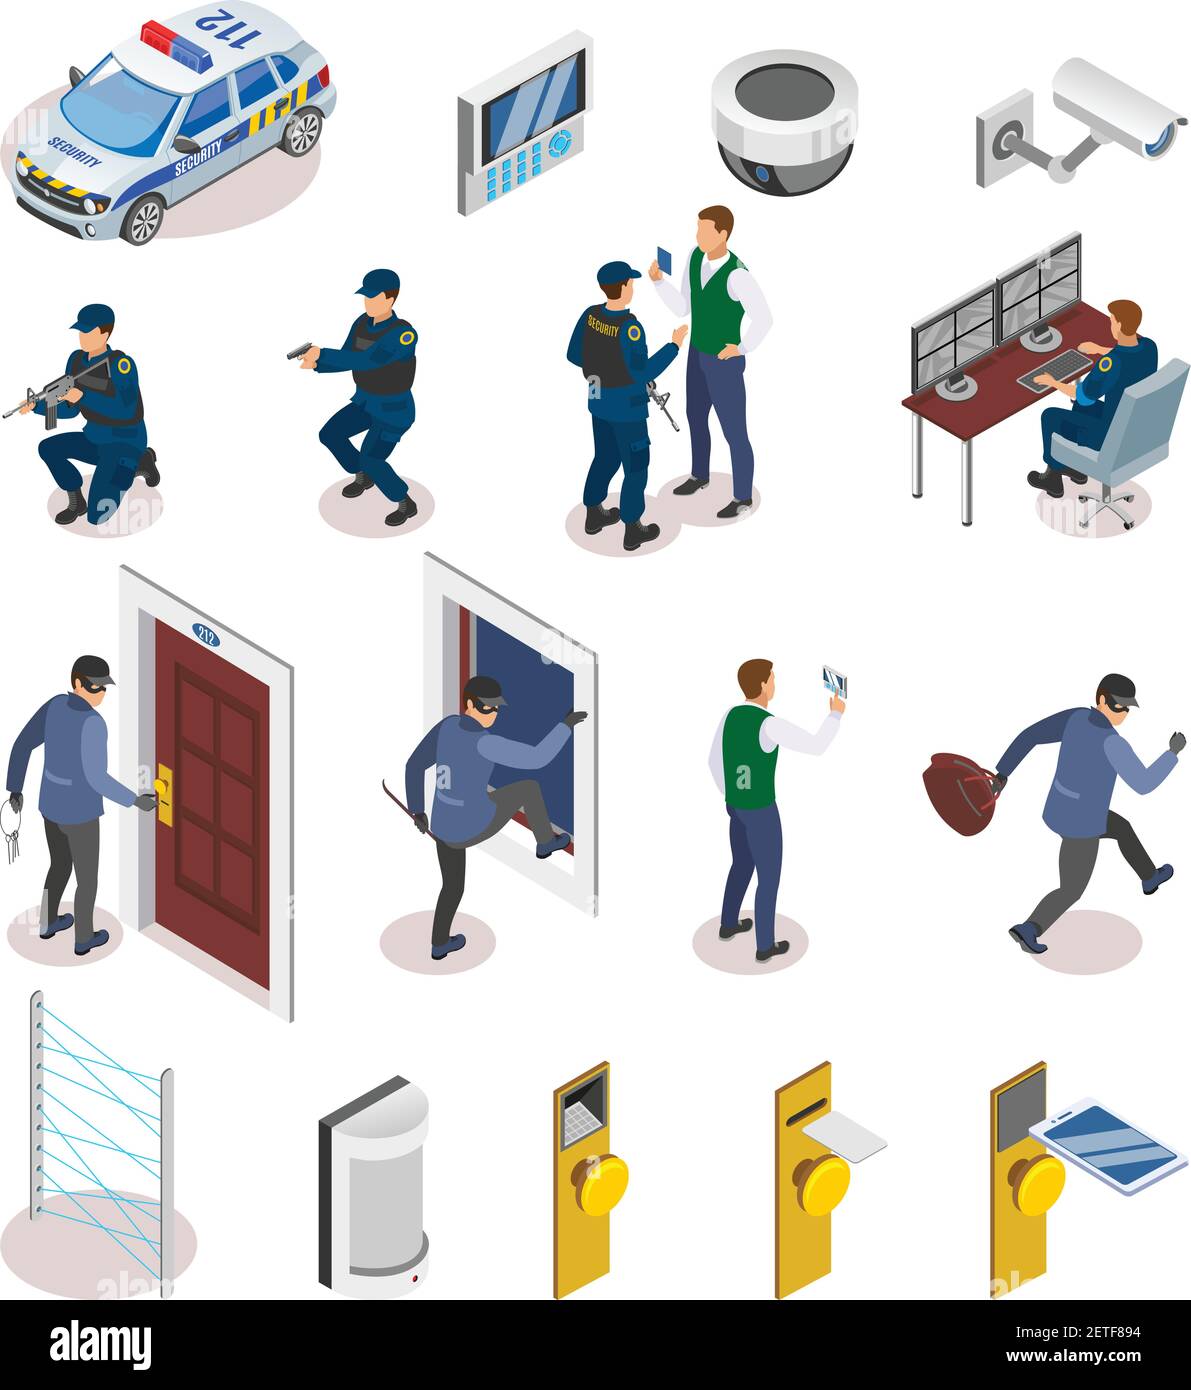 Security systems isometric icons set with laser motion sensors surveillance camera operator officers in action vector illustration Stock Vector